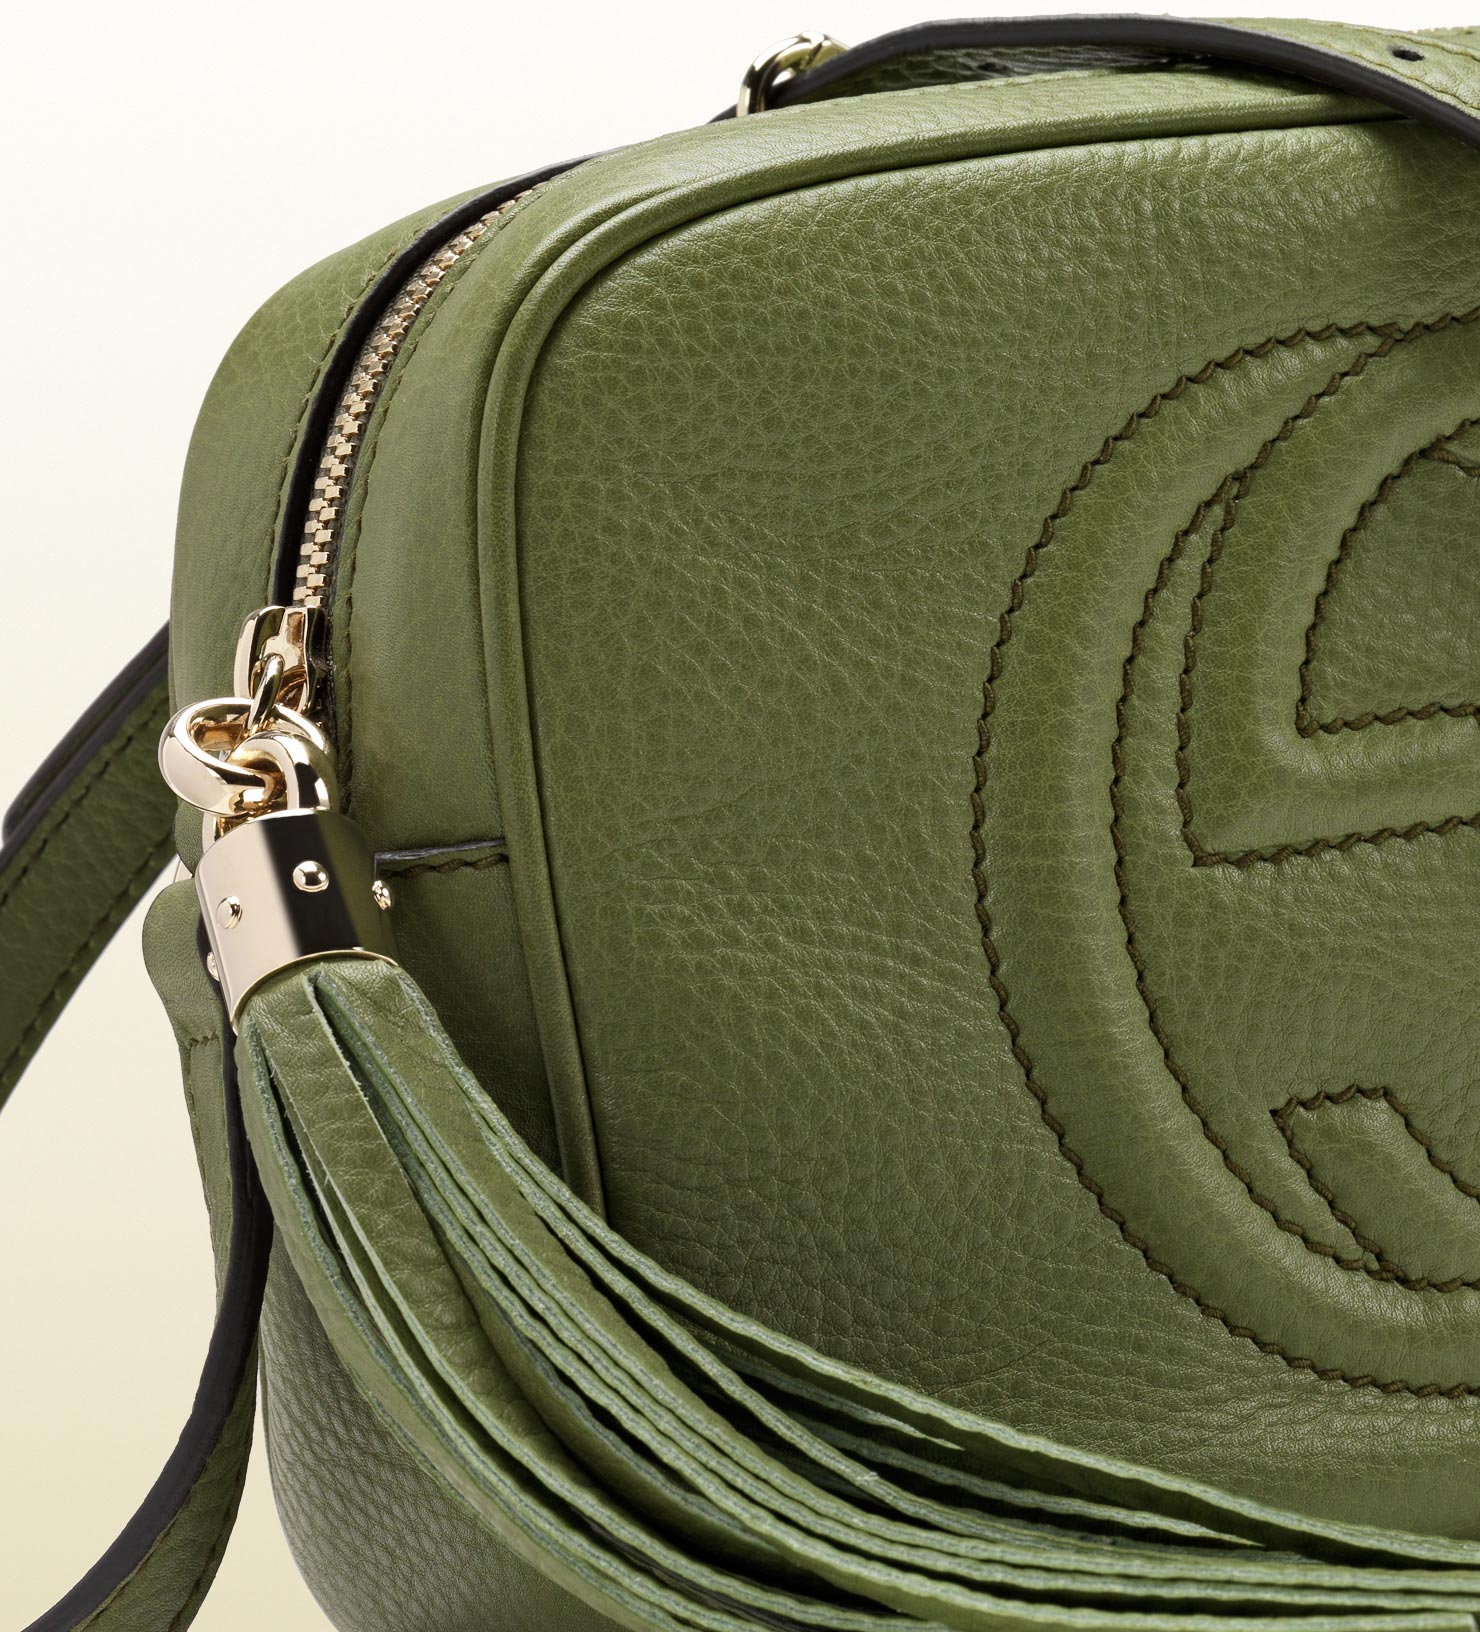 Lyst - Gucci Soho Green Leather Disco Bag in Green